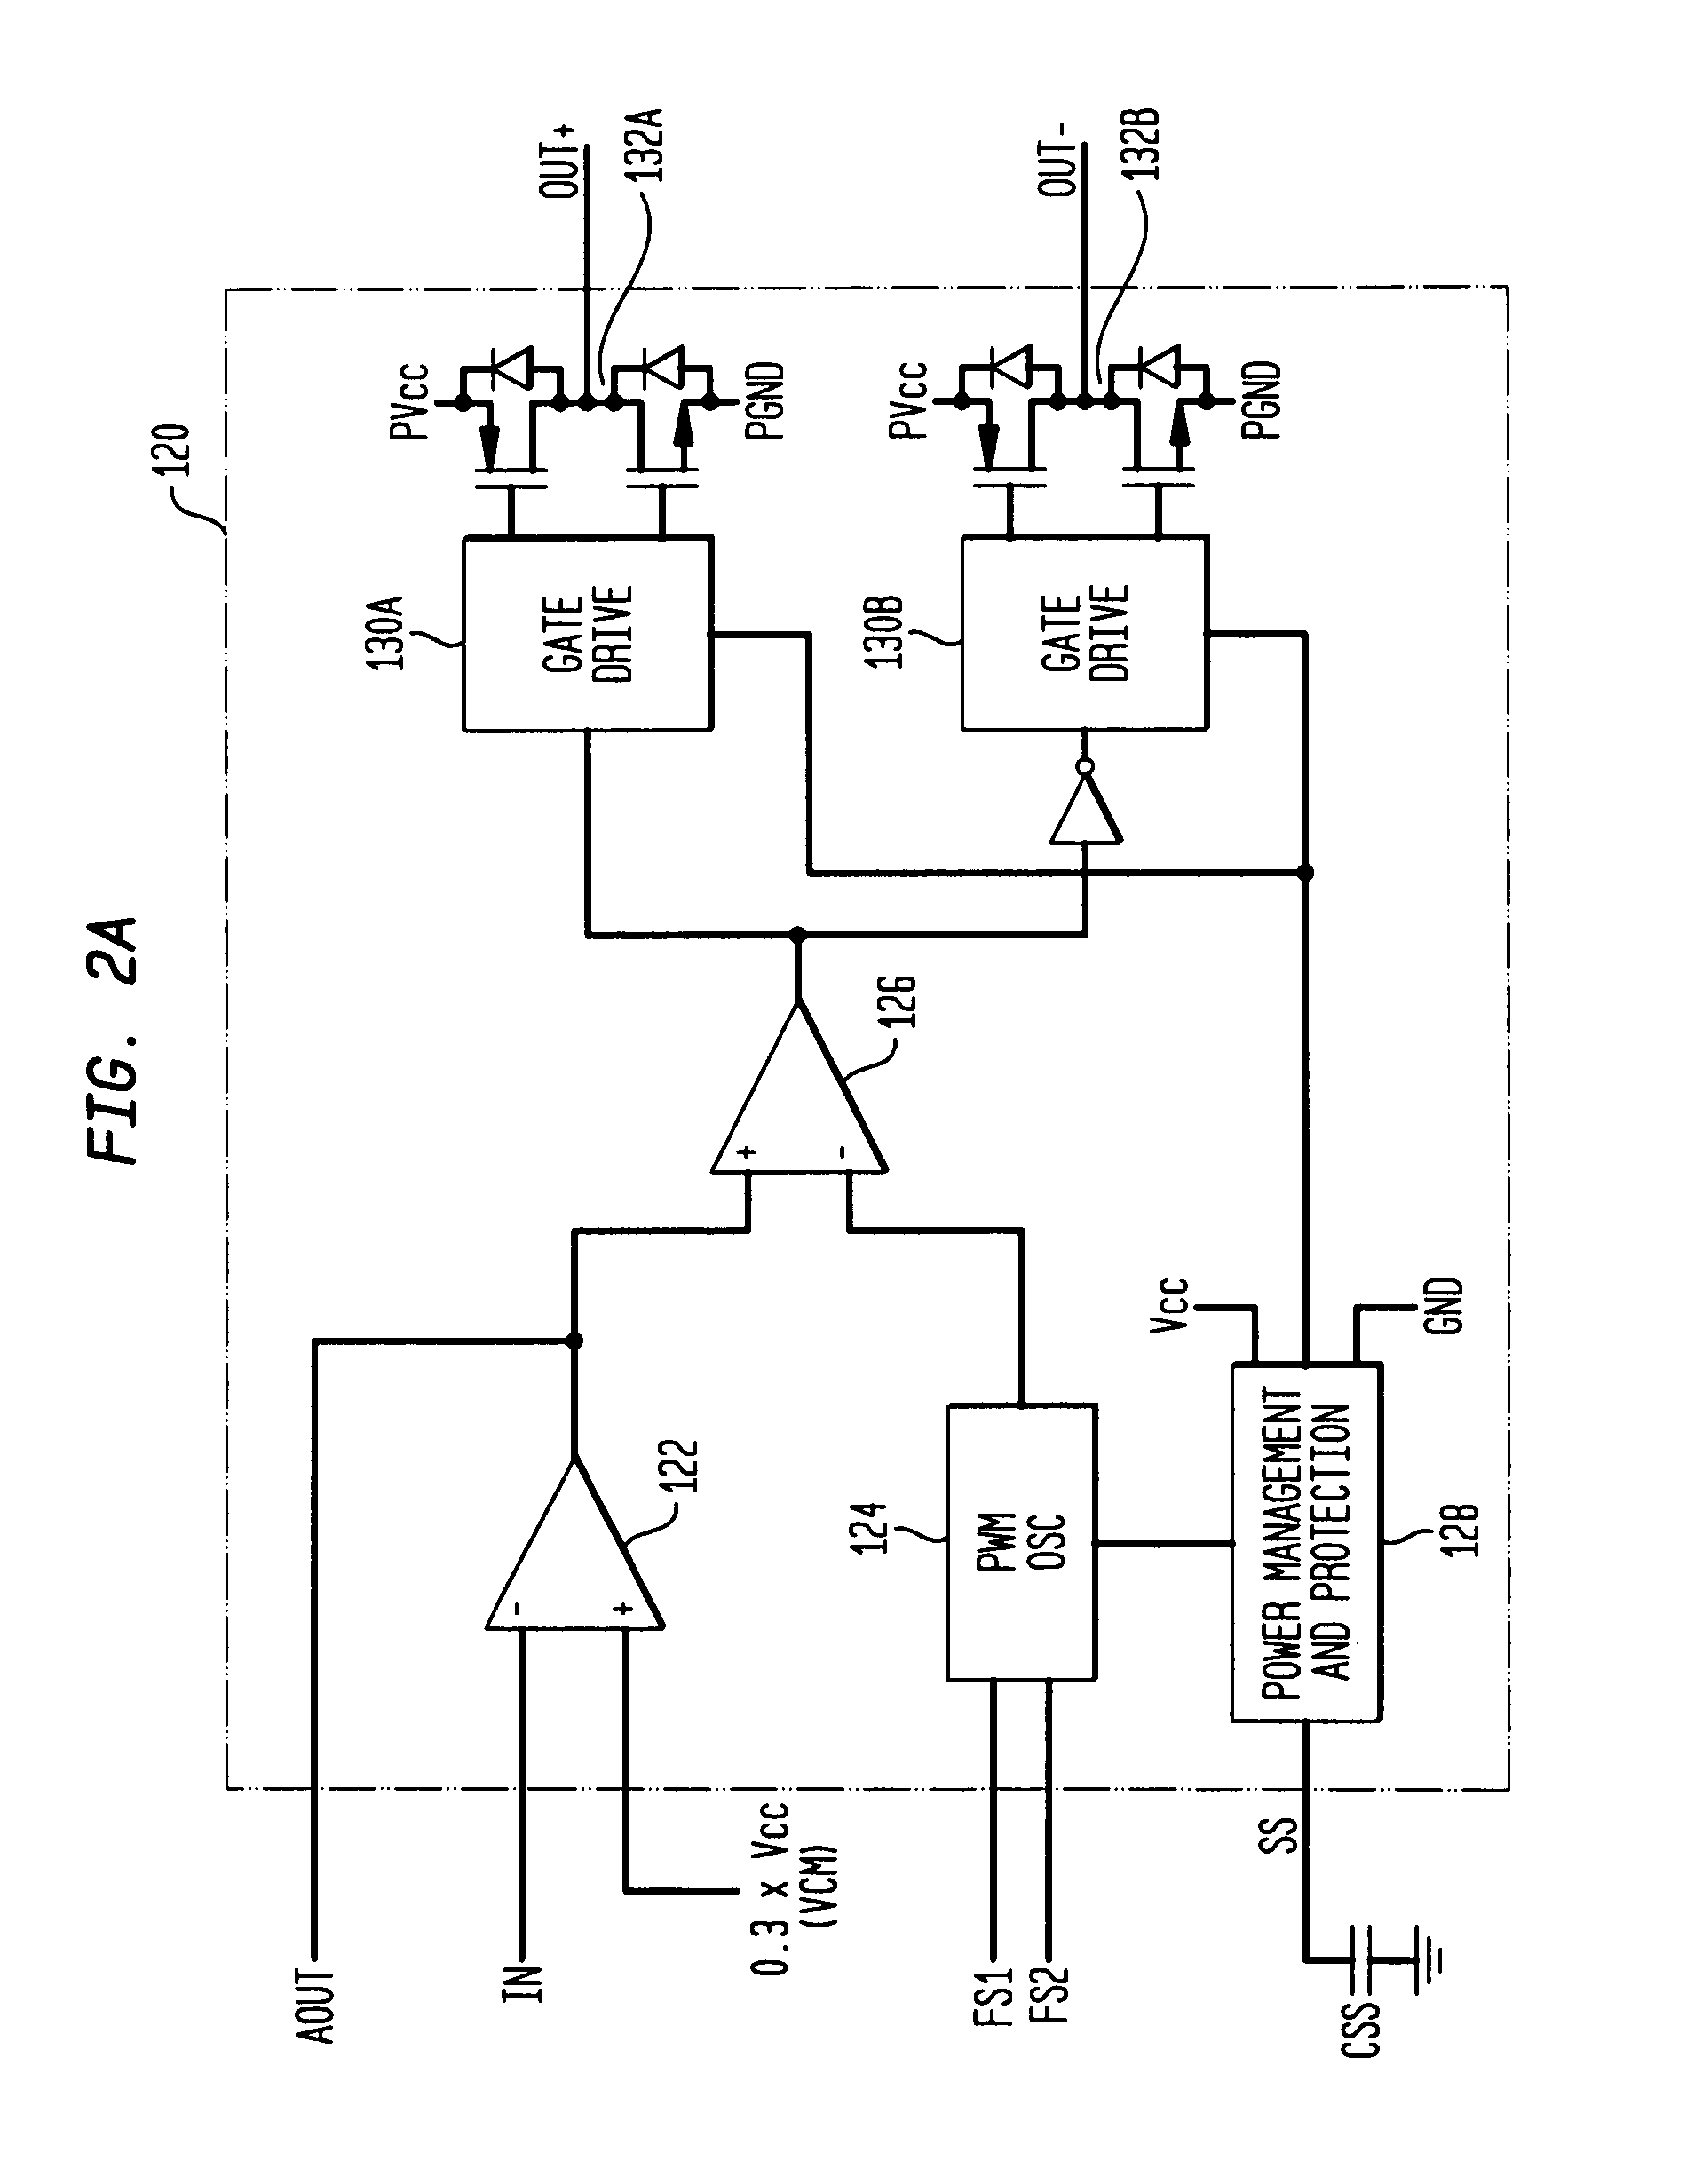 Impedance matching speaker wire system